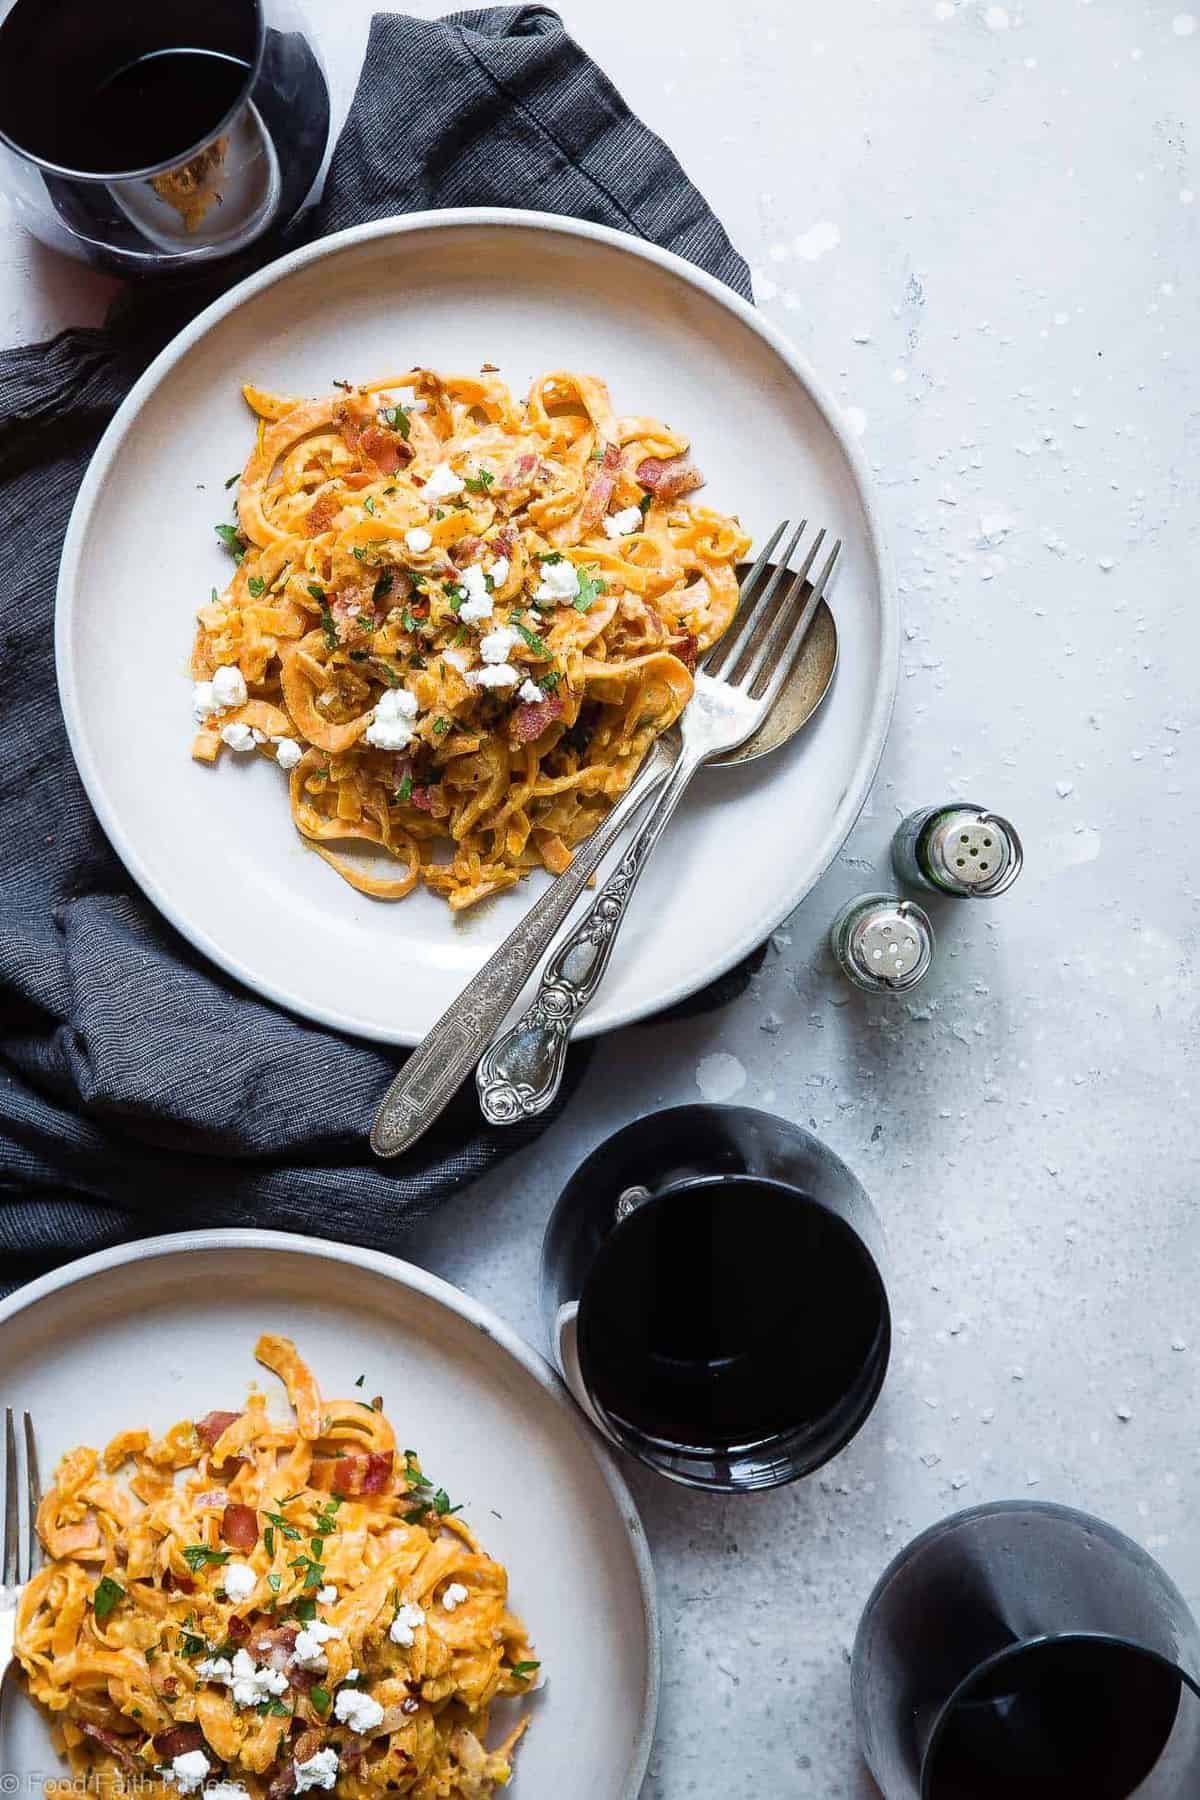 Creamy Healthy Carbonara with Sweet Potato Noodles -A healthy and gluten free twist on the classic veggie carbonara recipe that uses goat cheese to make it extra creamy! Quick, easy, family friendly and only 4 ingredients! Even picky eaters will LOVE it! | #Foodfaithfitness | #Glutenfree #Healthy #Spiralized #Grainfree #Sweetpotato